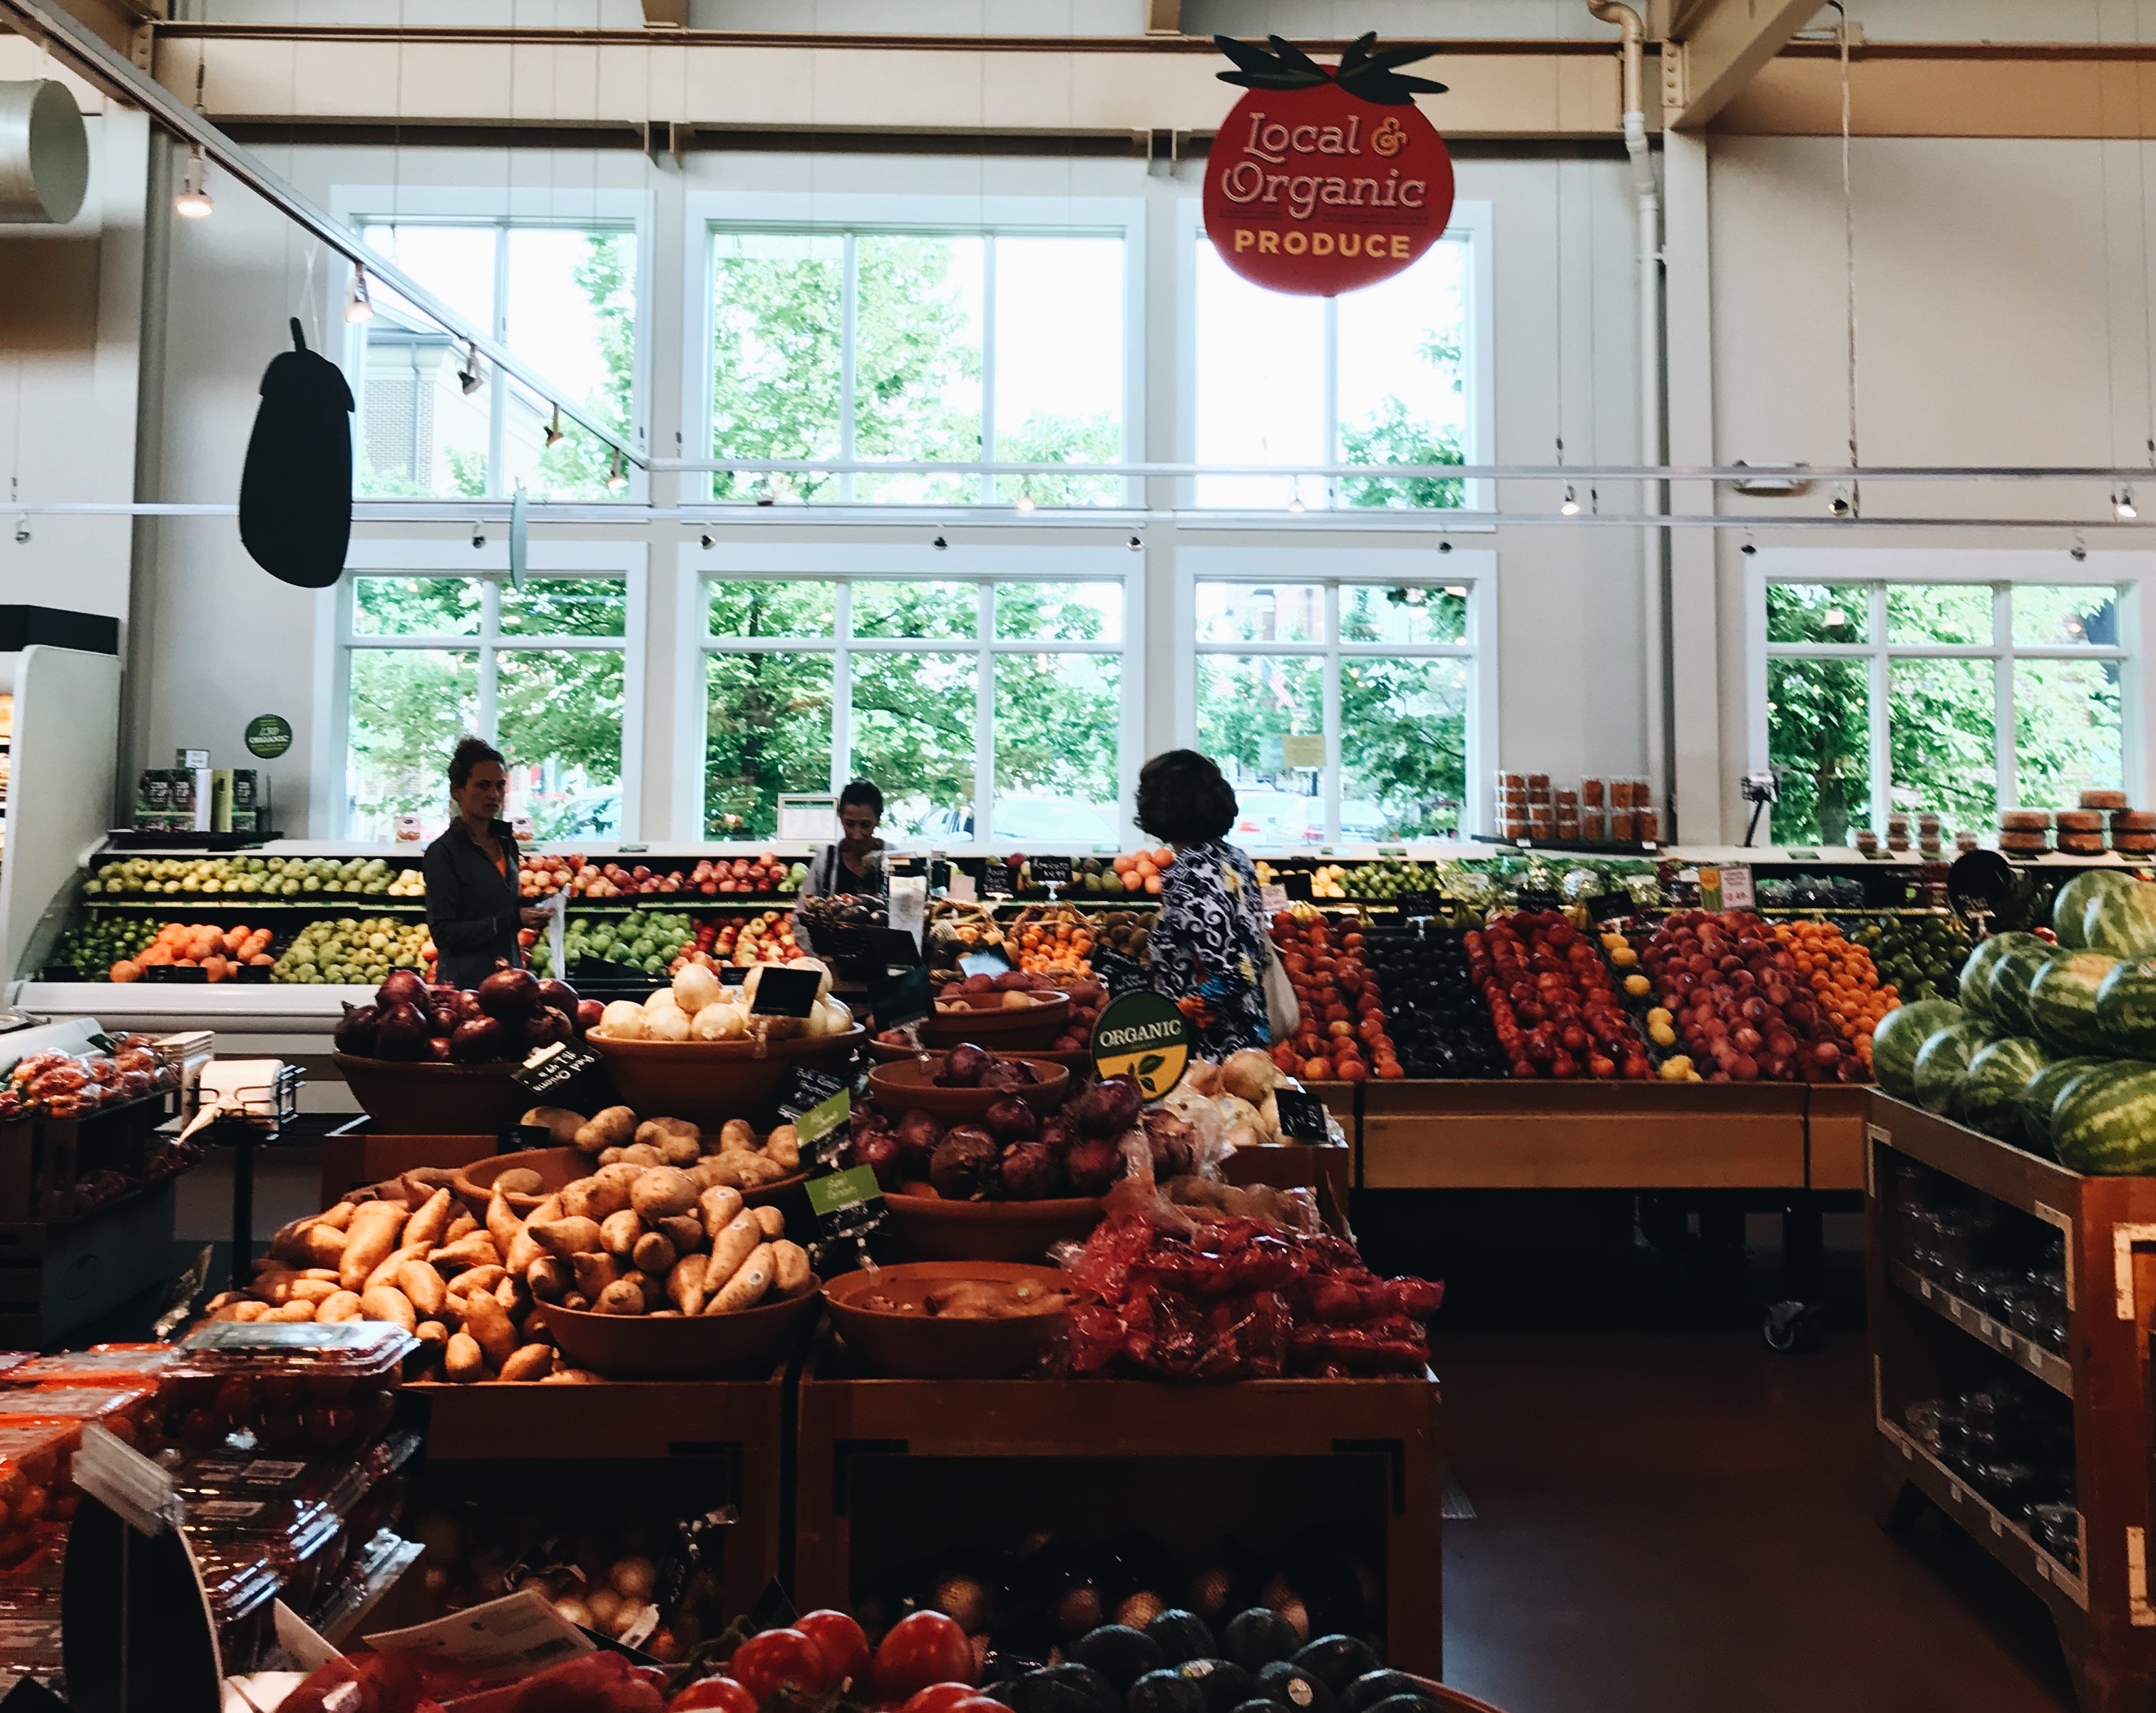 How to grocery shop when you follow a plant-based diet